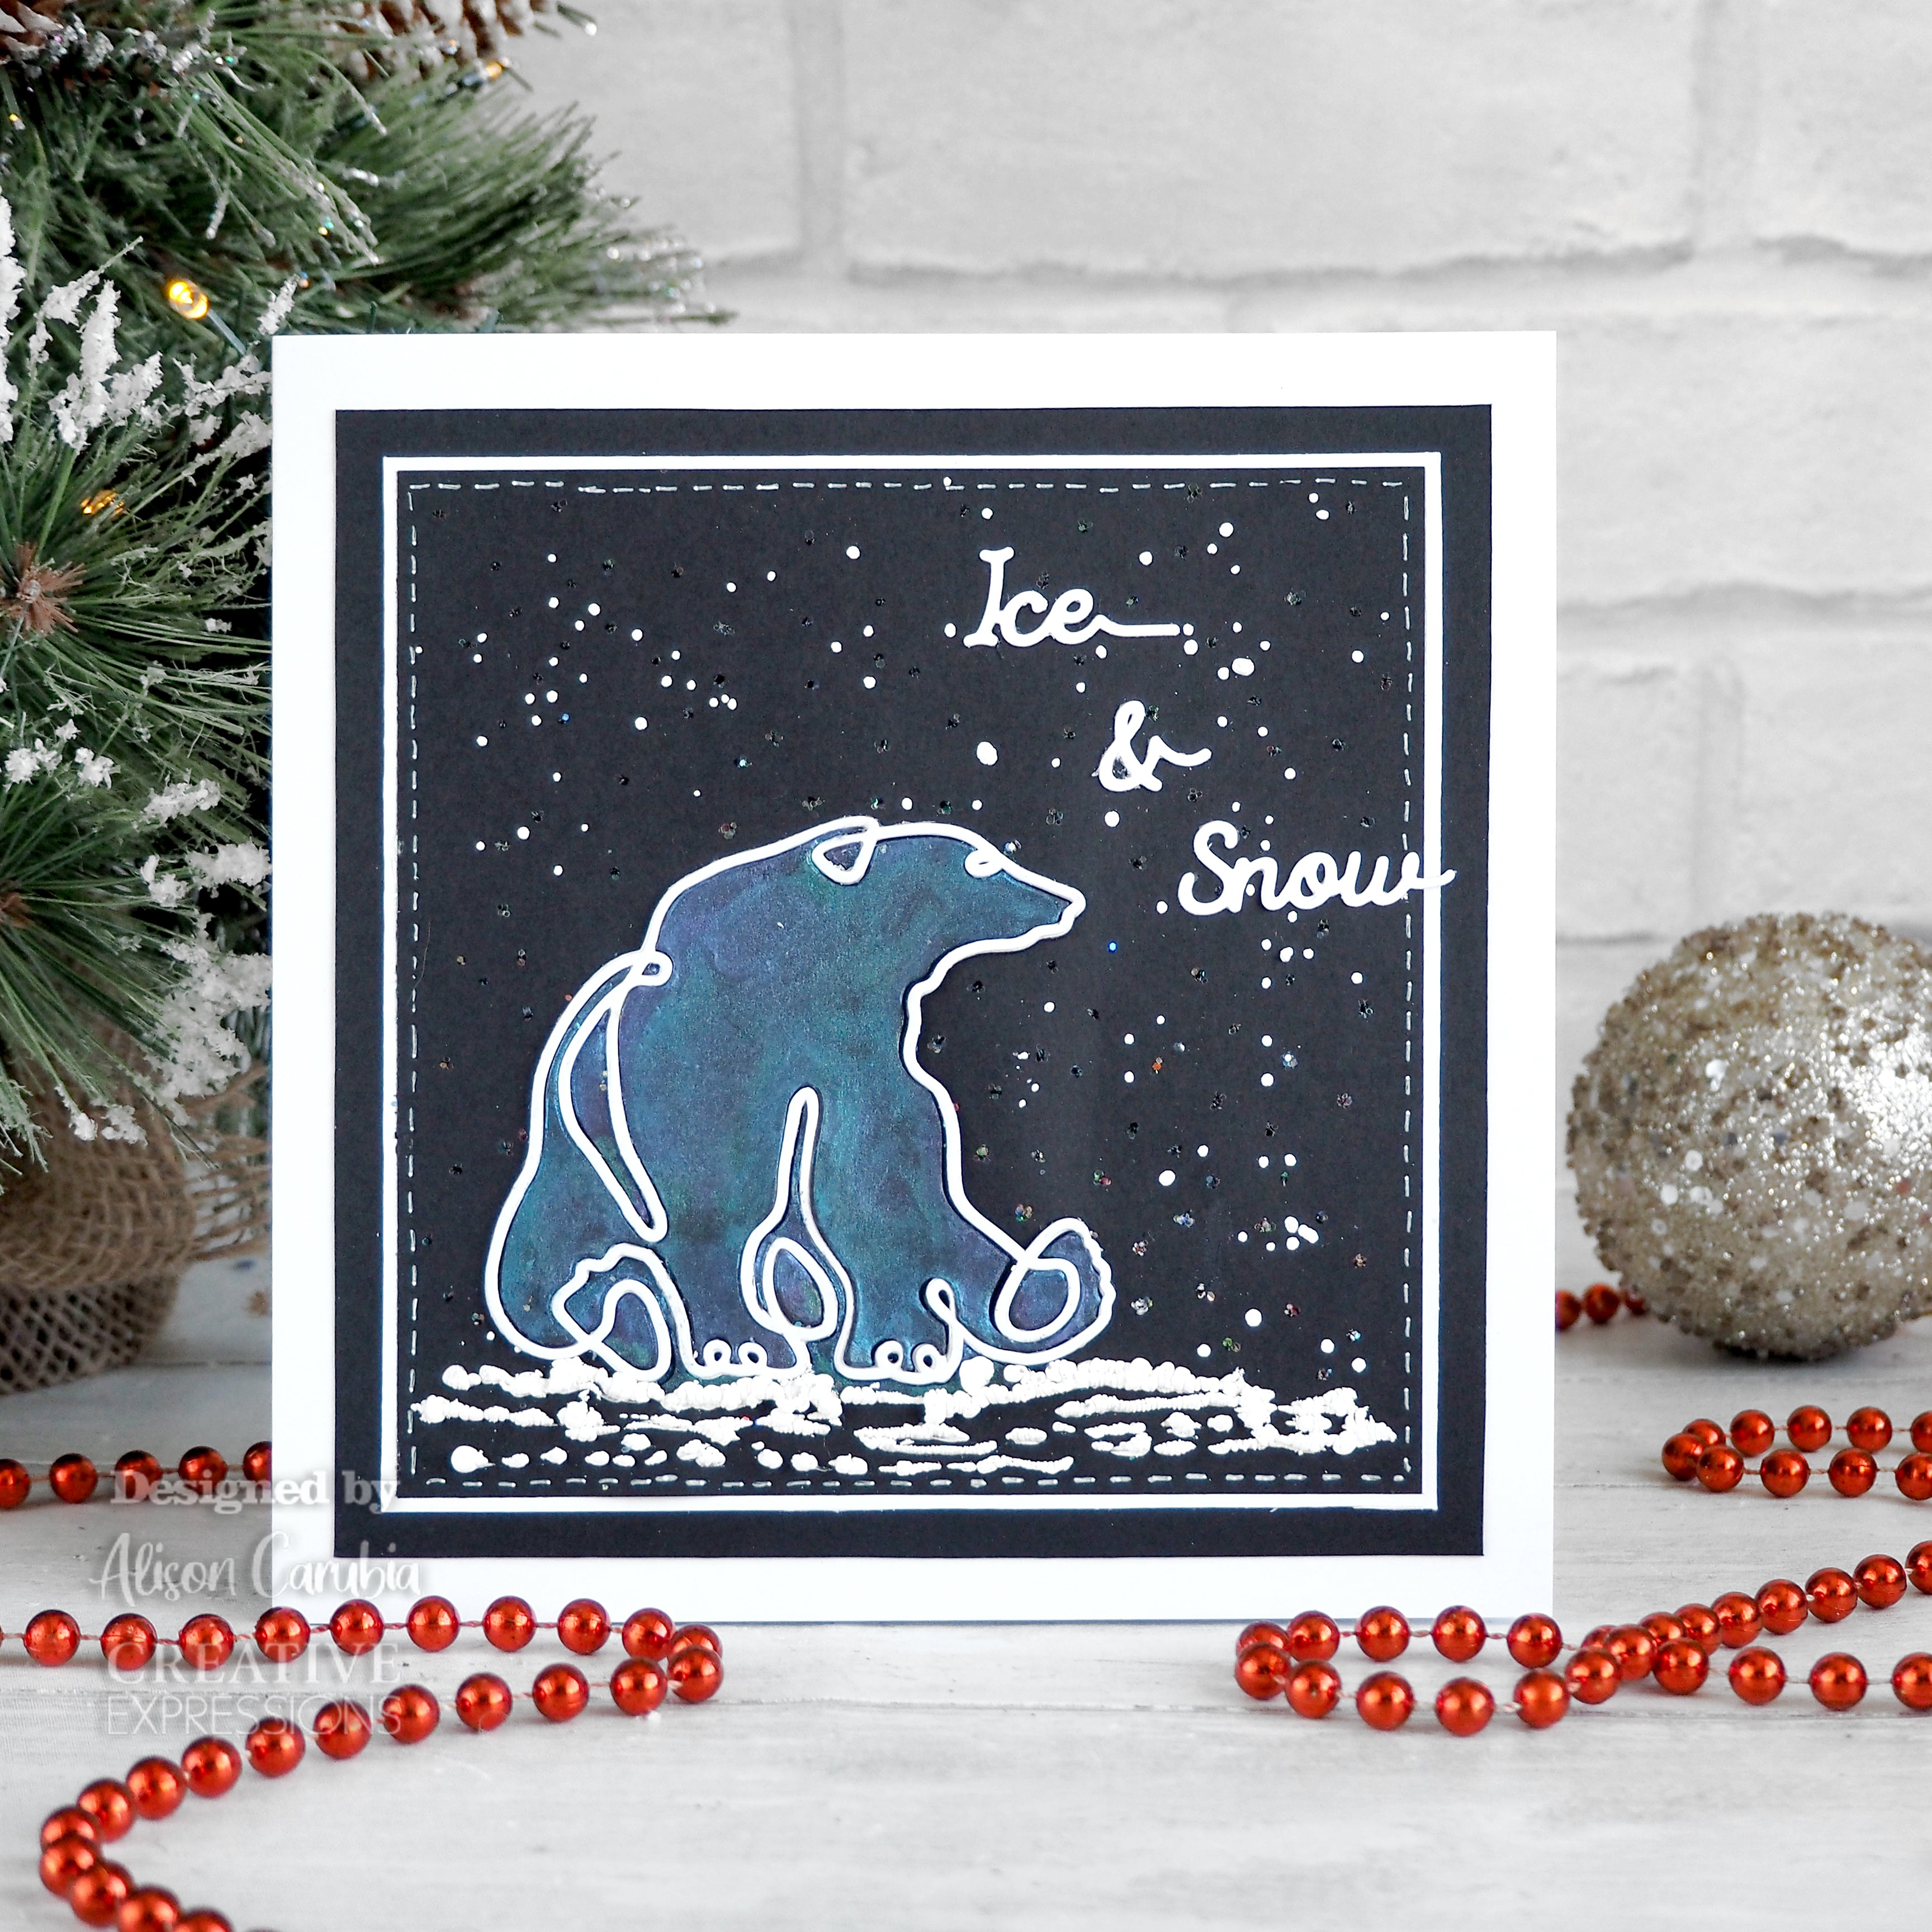 Creative Expressions One-liner Collection Snow & Ice Craft Die